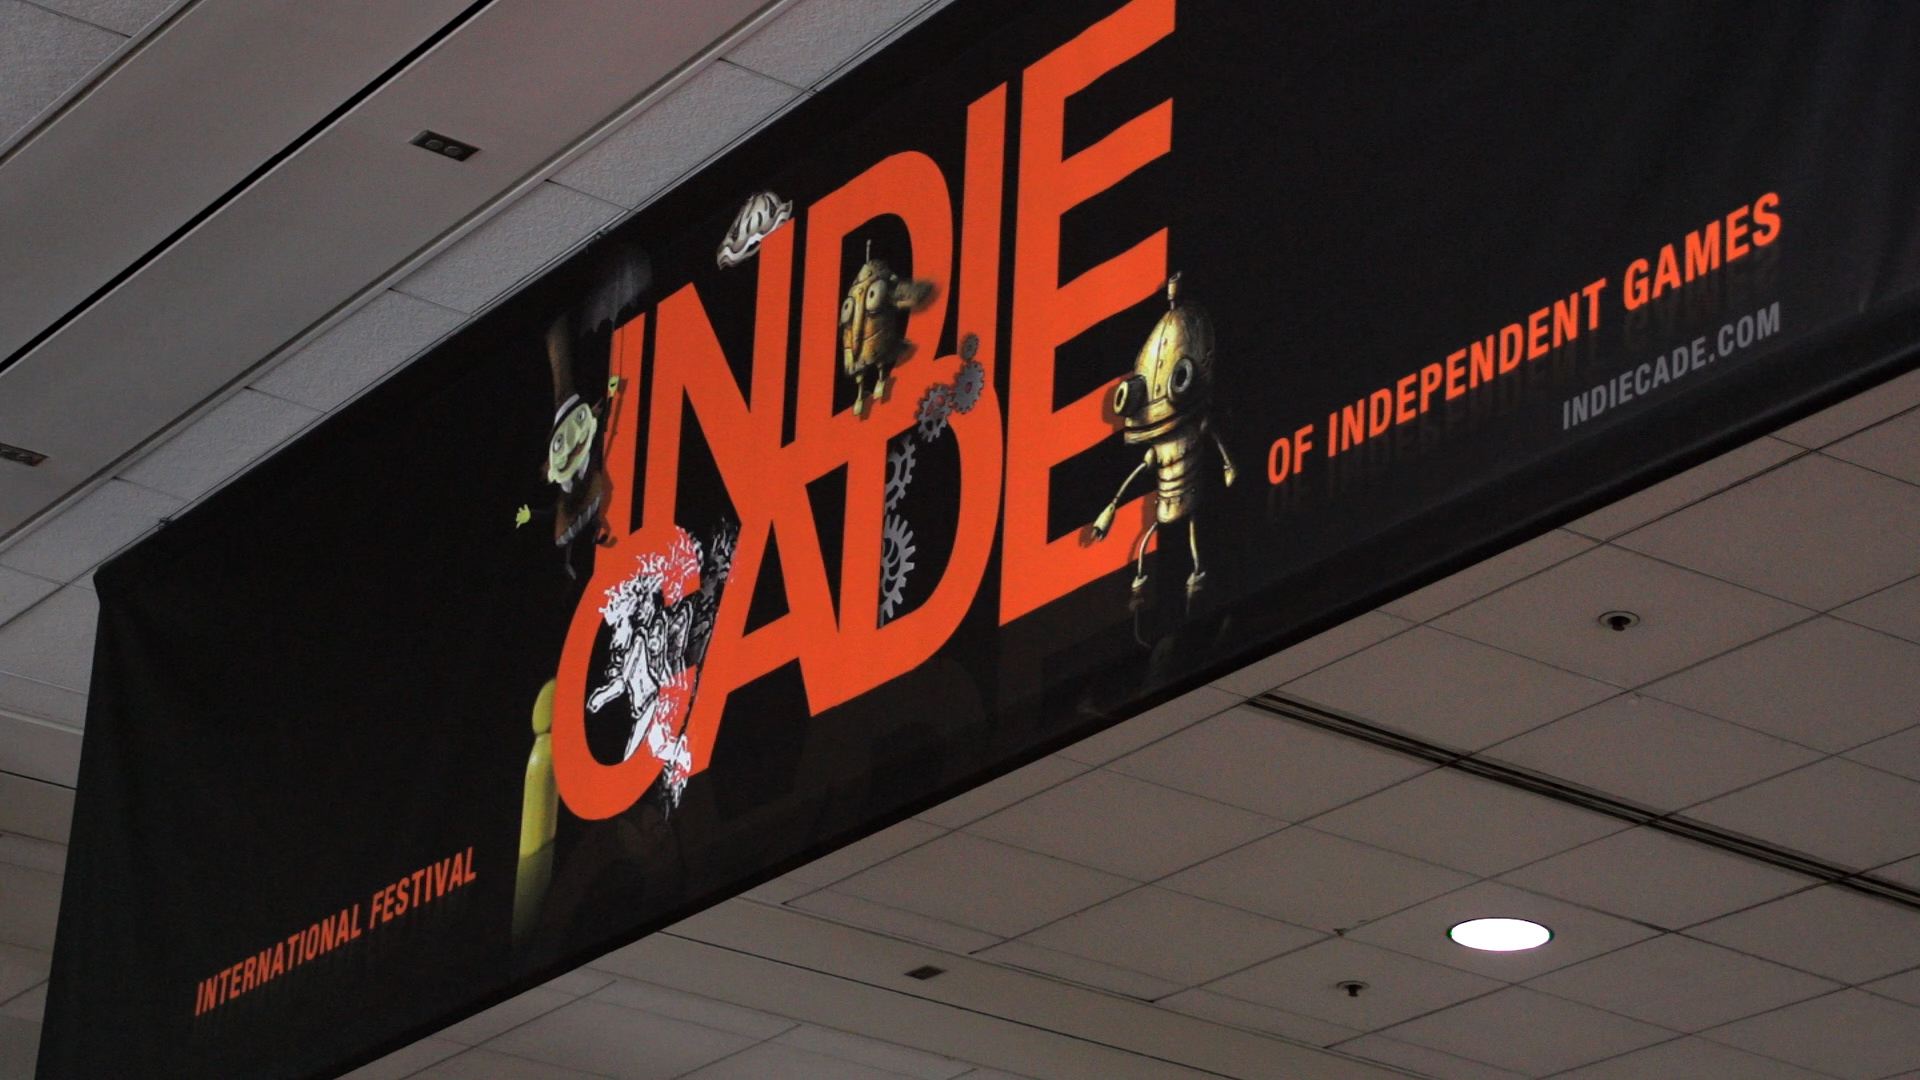 What Were All Those Indie Games Doing At E3 Anyway?